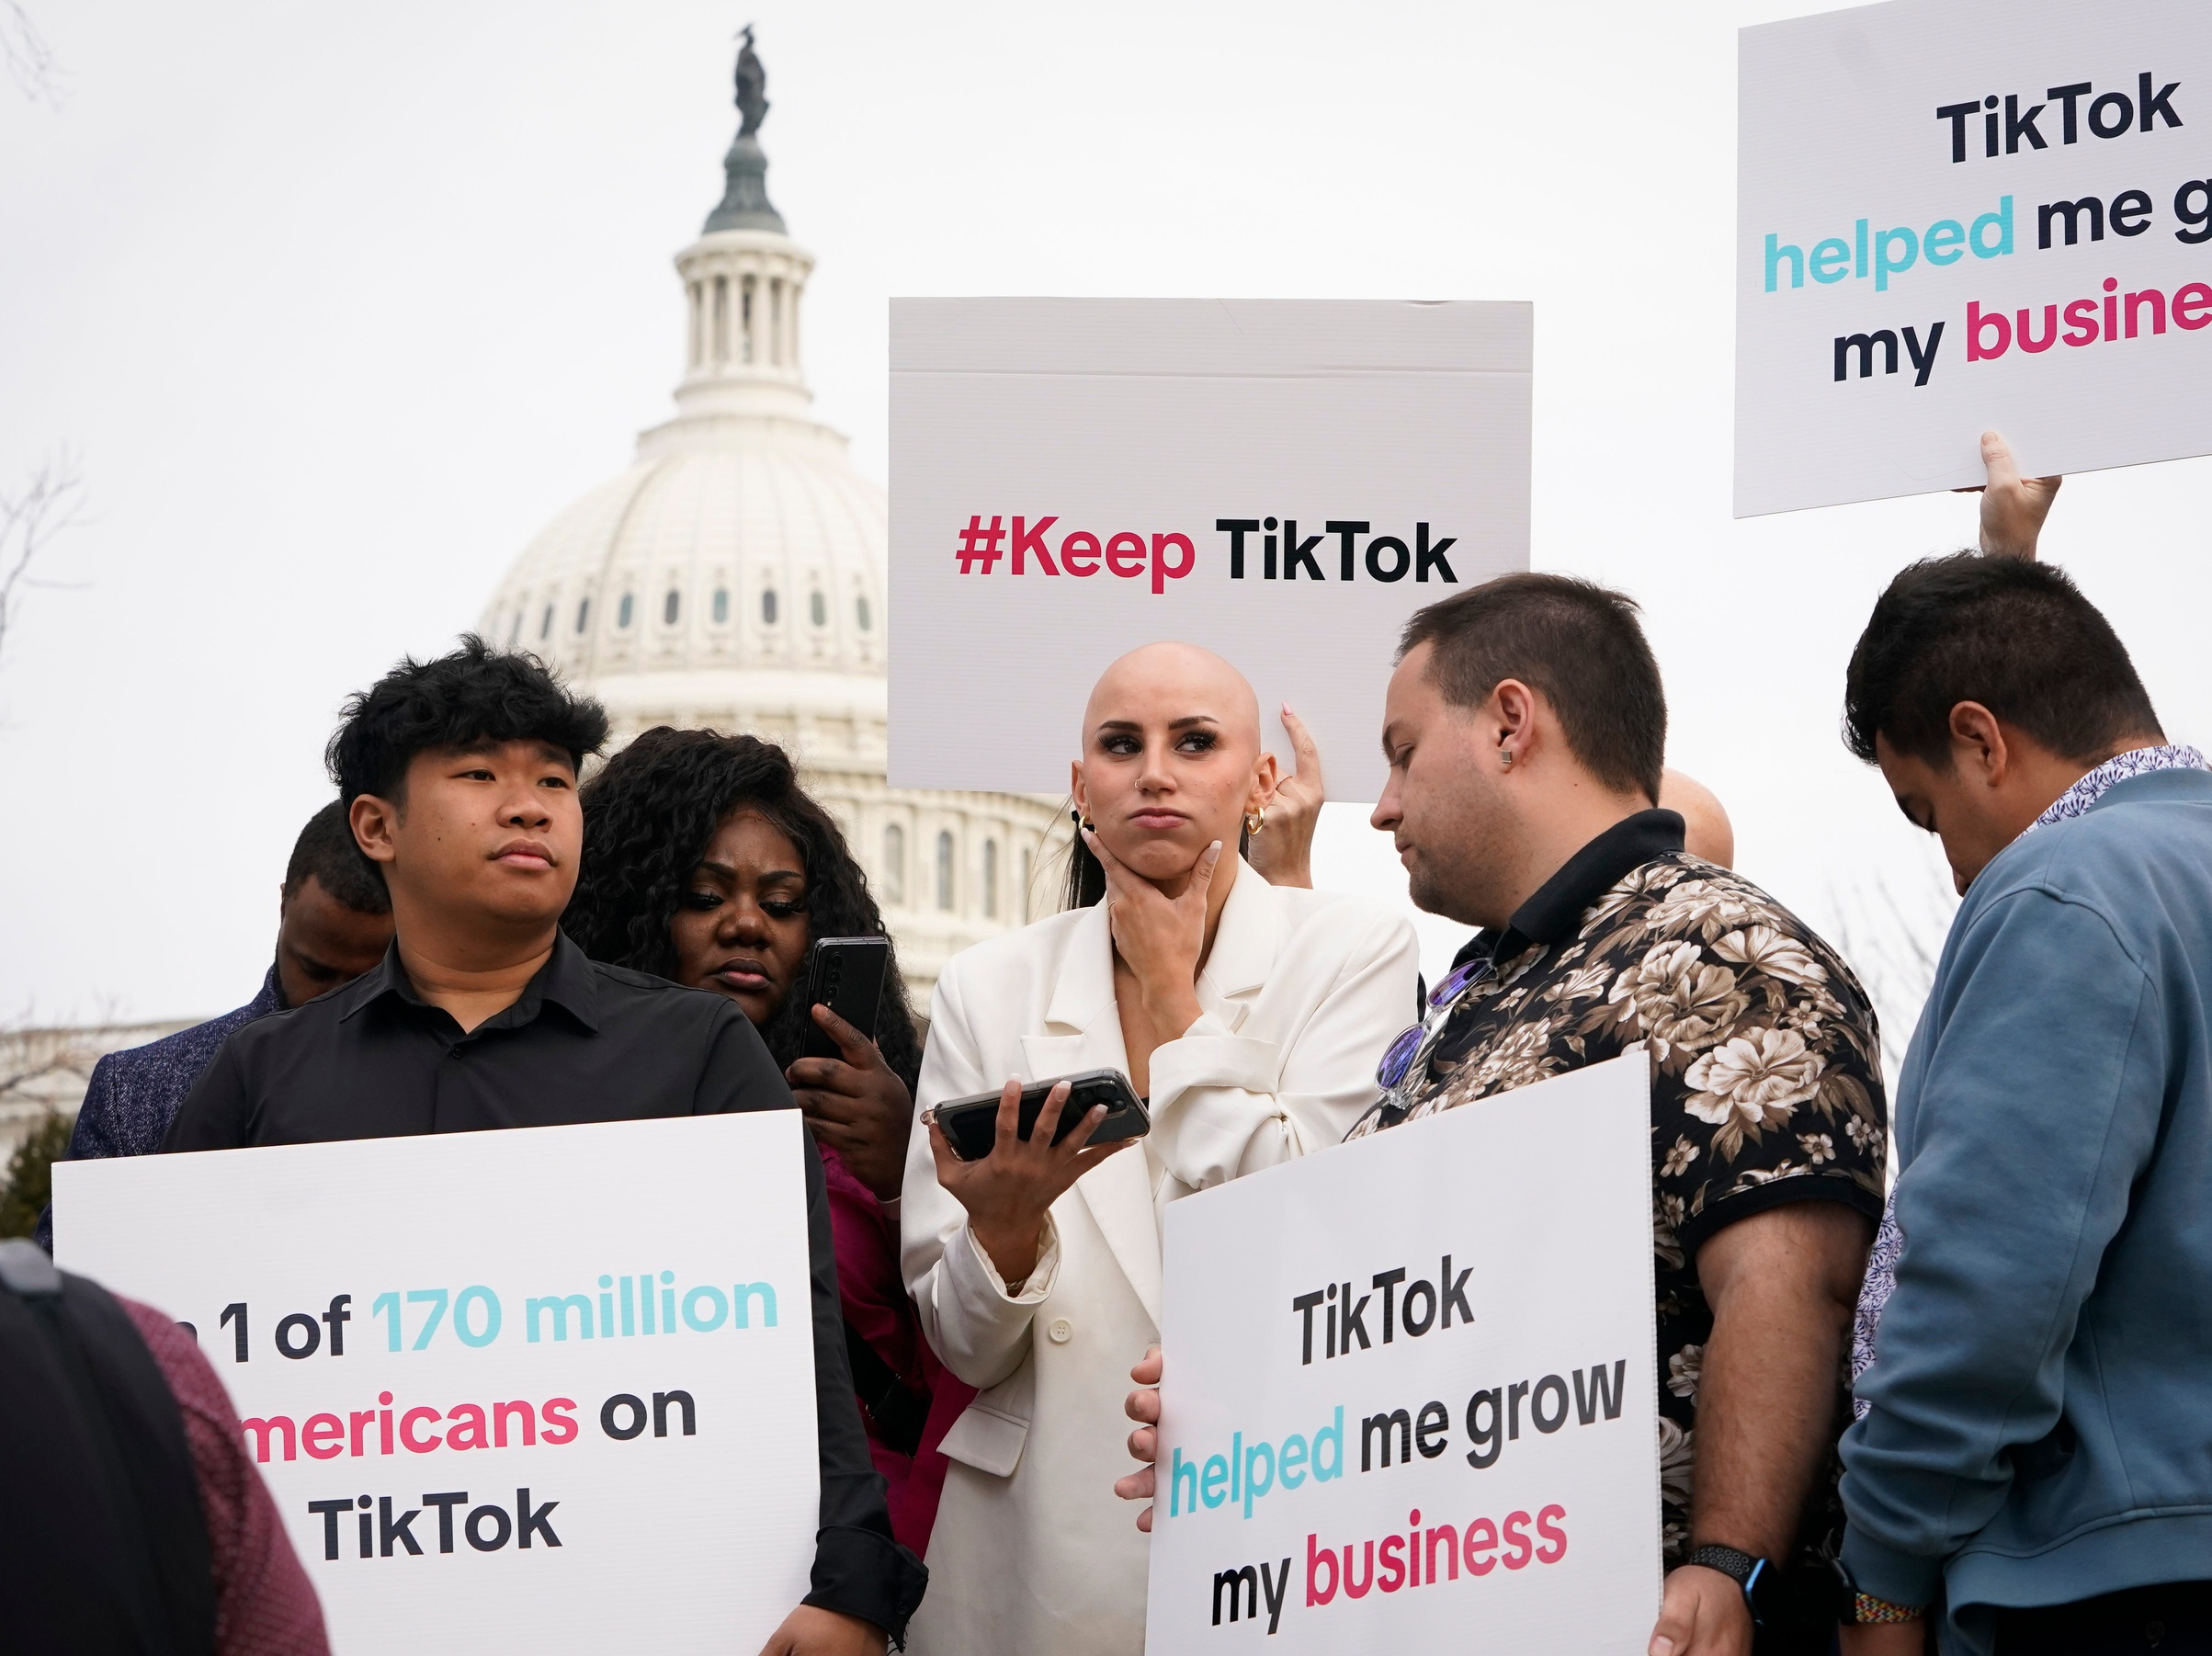 TikTok Ban: What Could This Mean for Data Privacy & Free Speech?